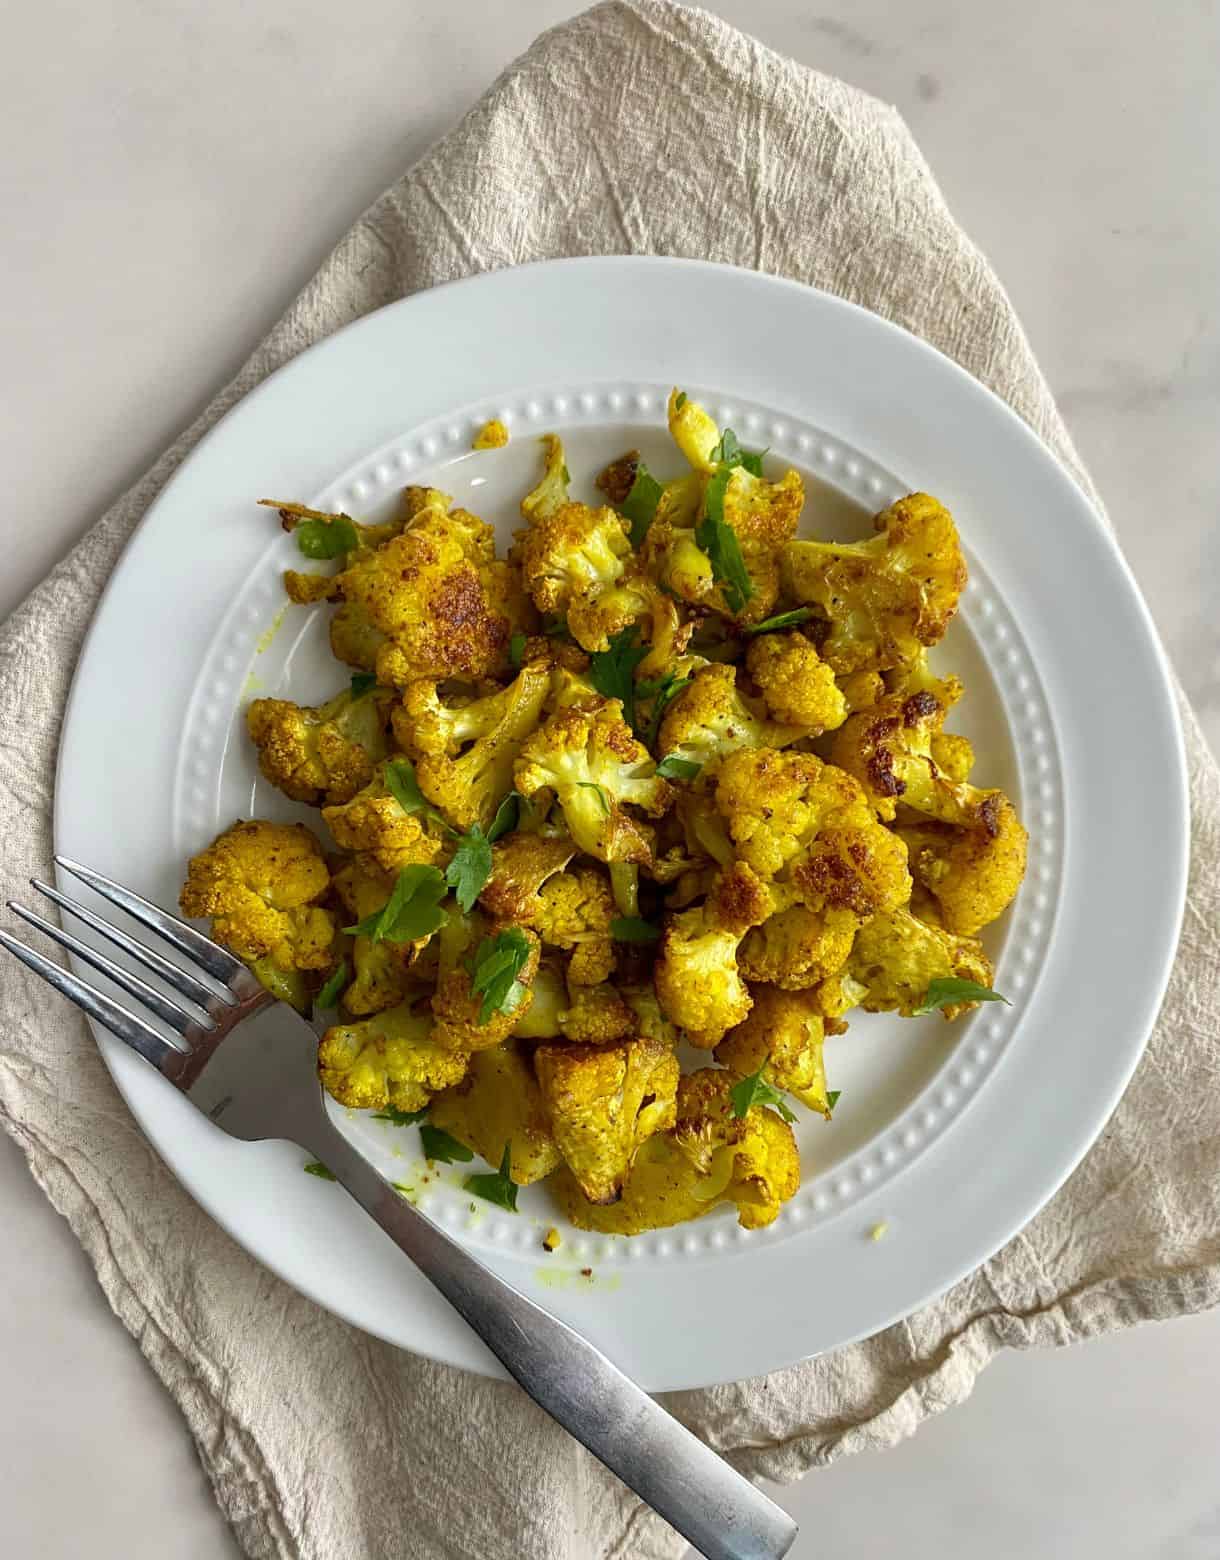 A plate of cooked Indian Roasted Cauliflower.